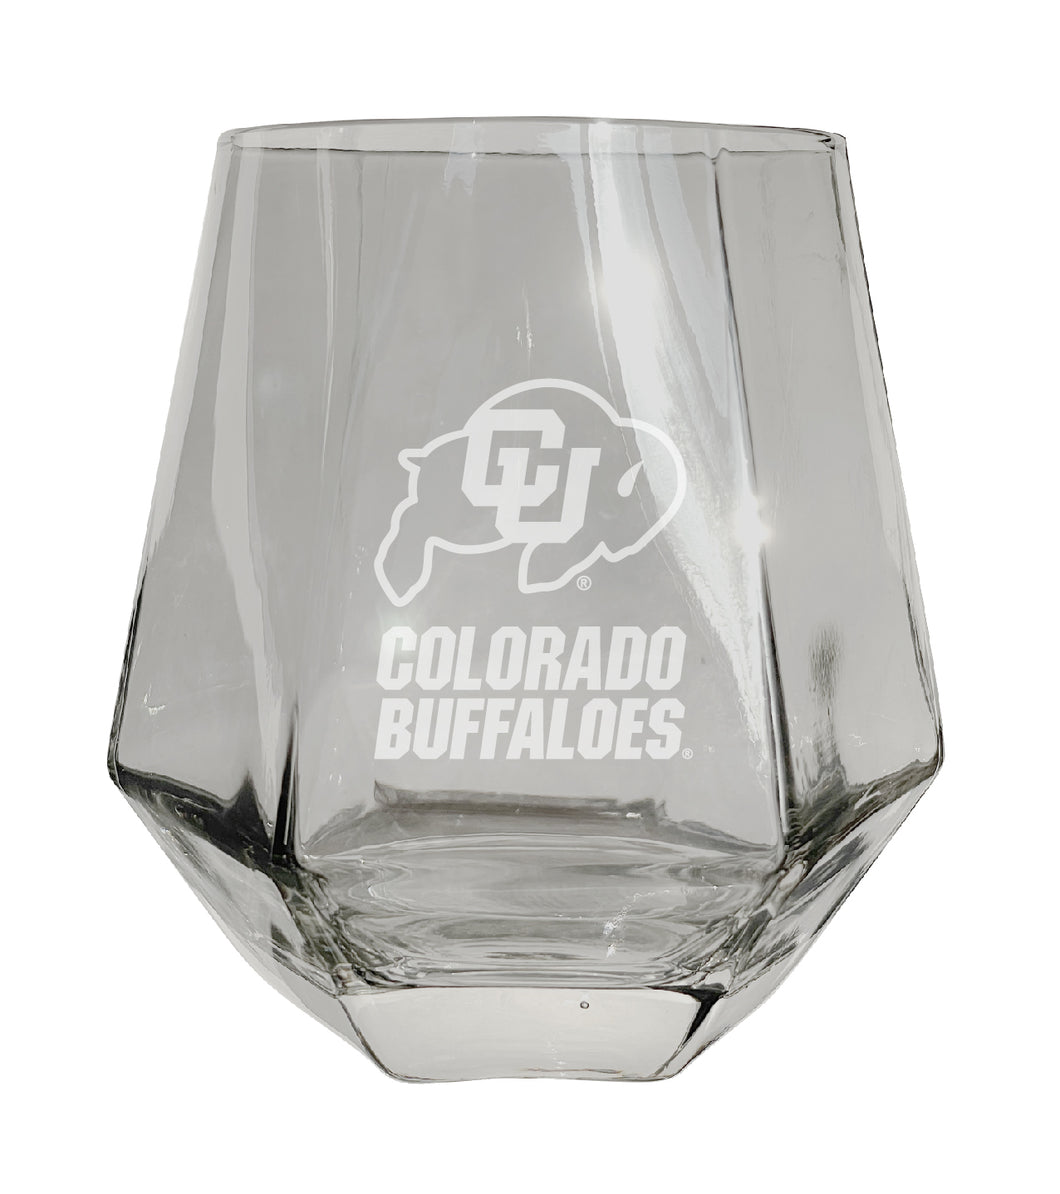 Colorado Buffaloes Tigers Etched Diamond Cut 10 oz Stemless Wine Glass - NCAA Licensed